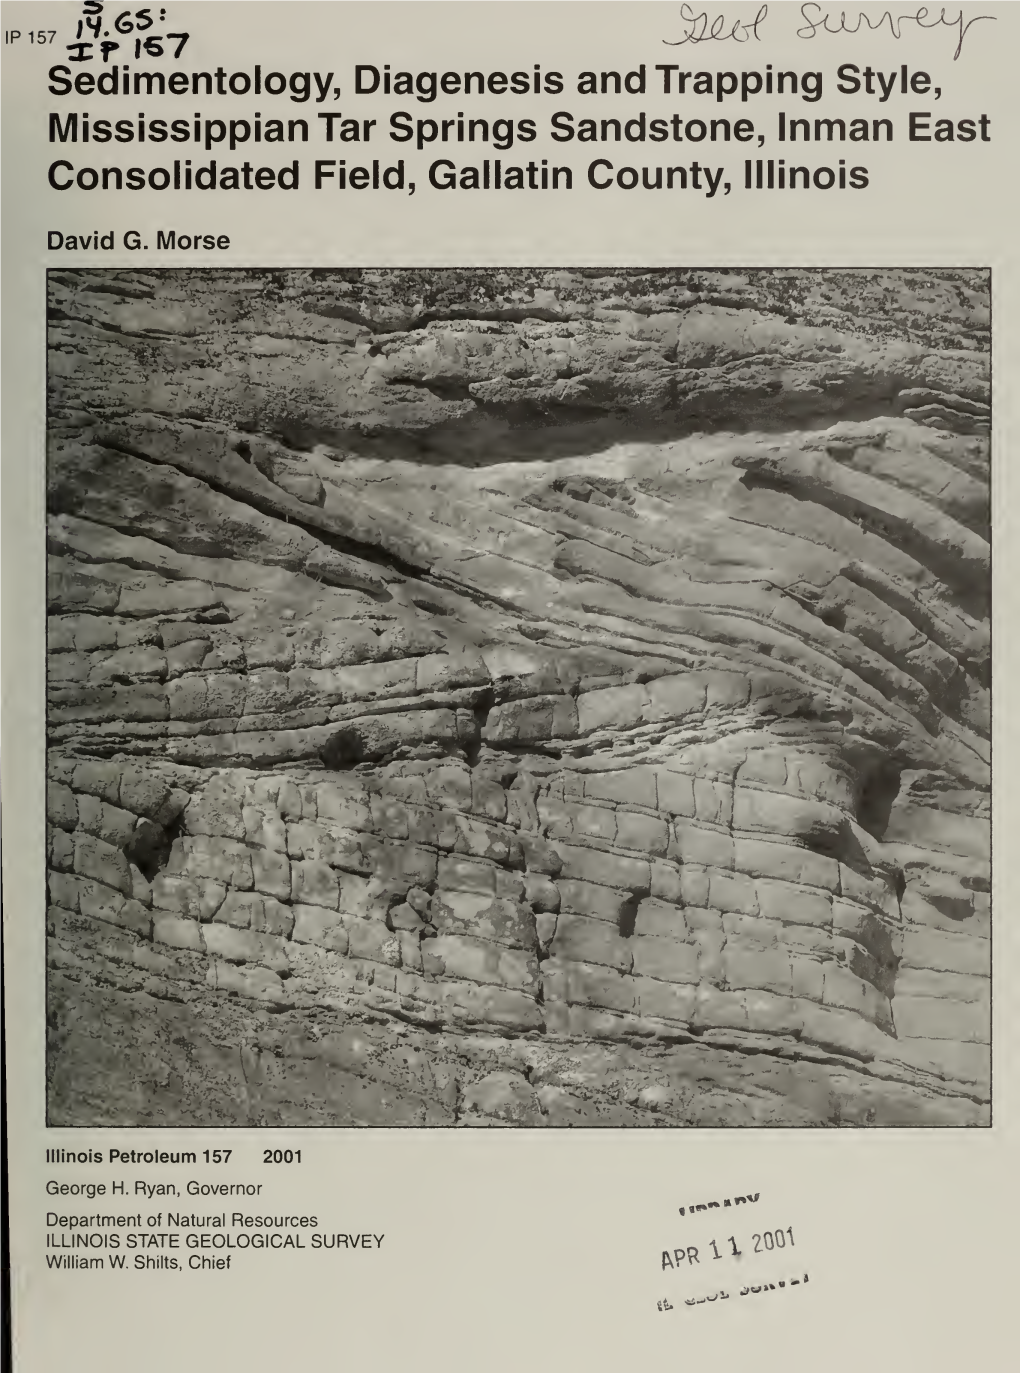 Sedimentology, Diagenesis and Trapping Style, Mississippian Tar Springs Sandstone, Inman East Consolidated Field, Gallatin Count